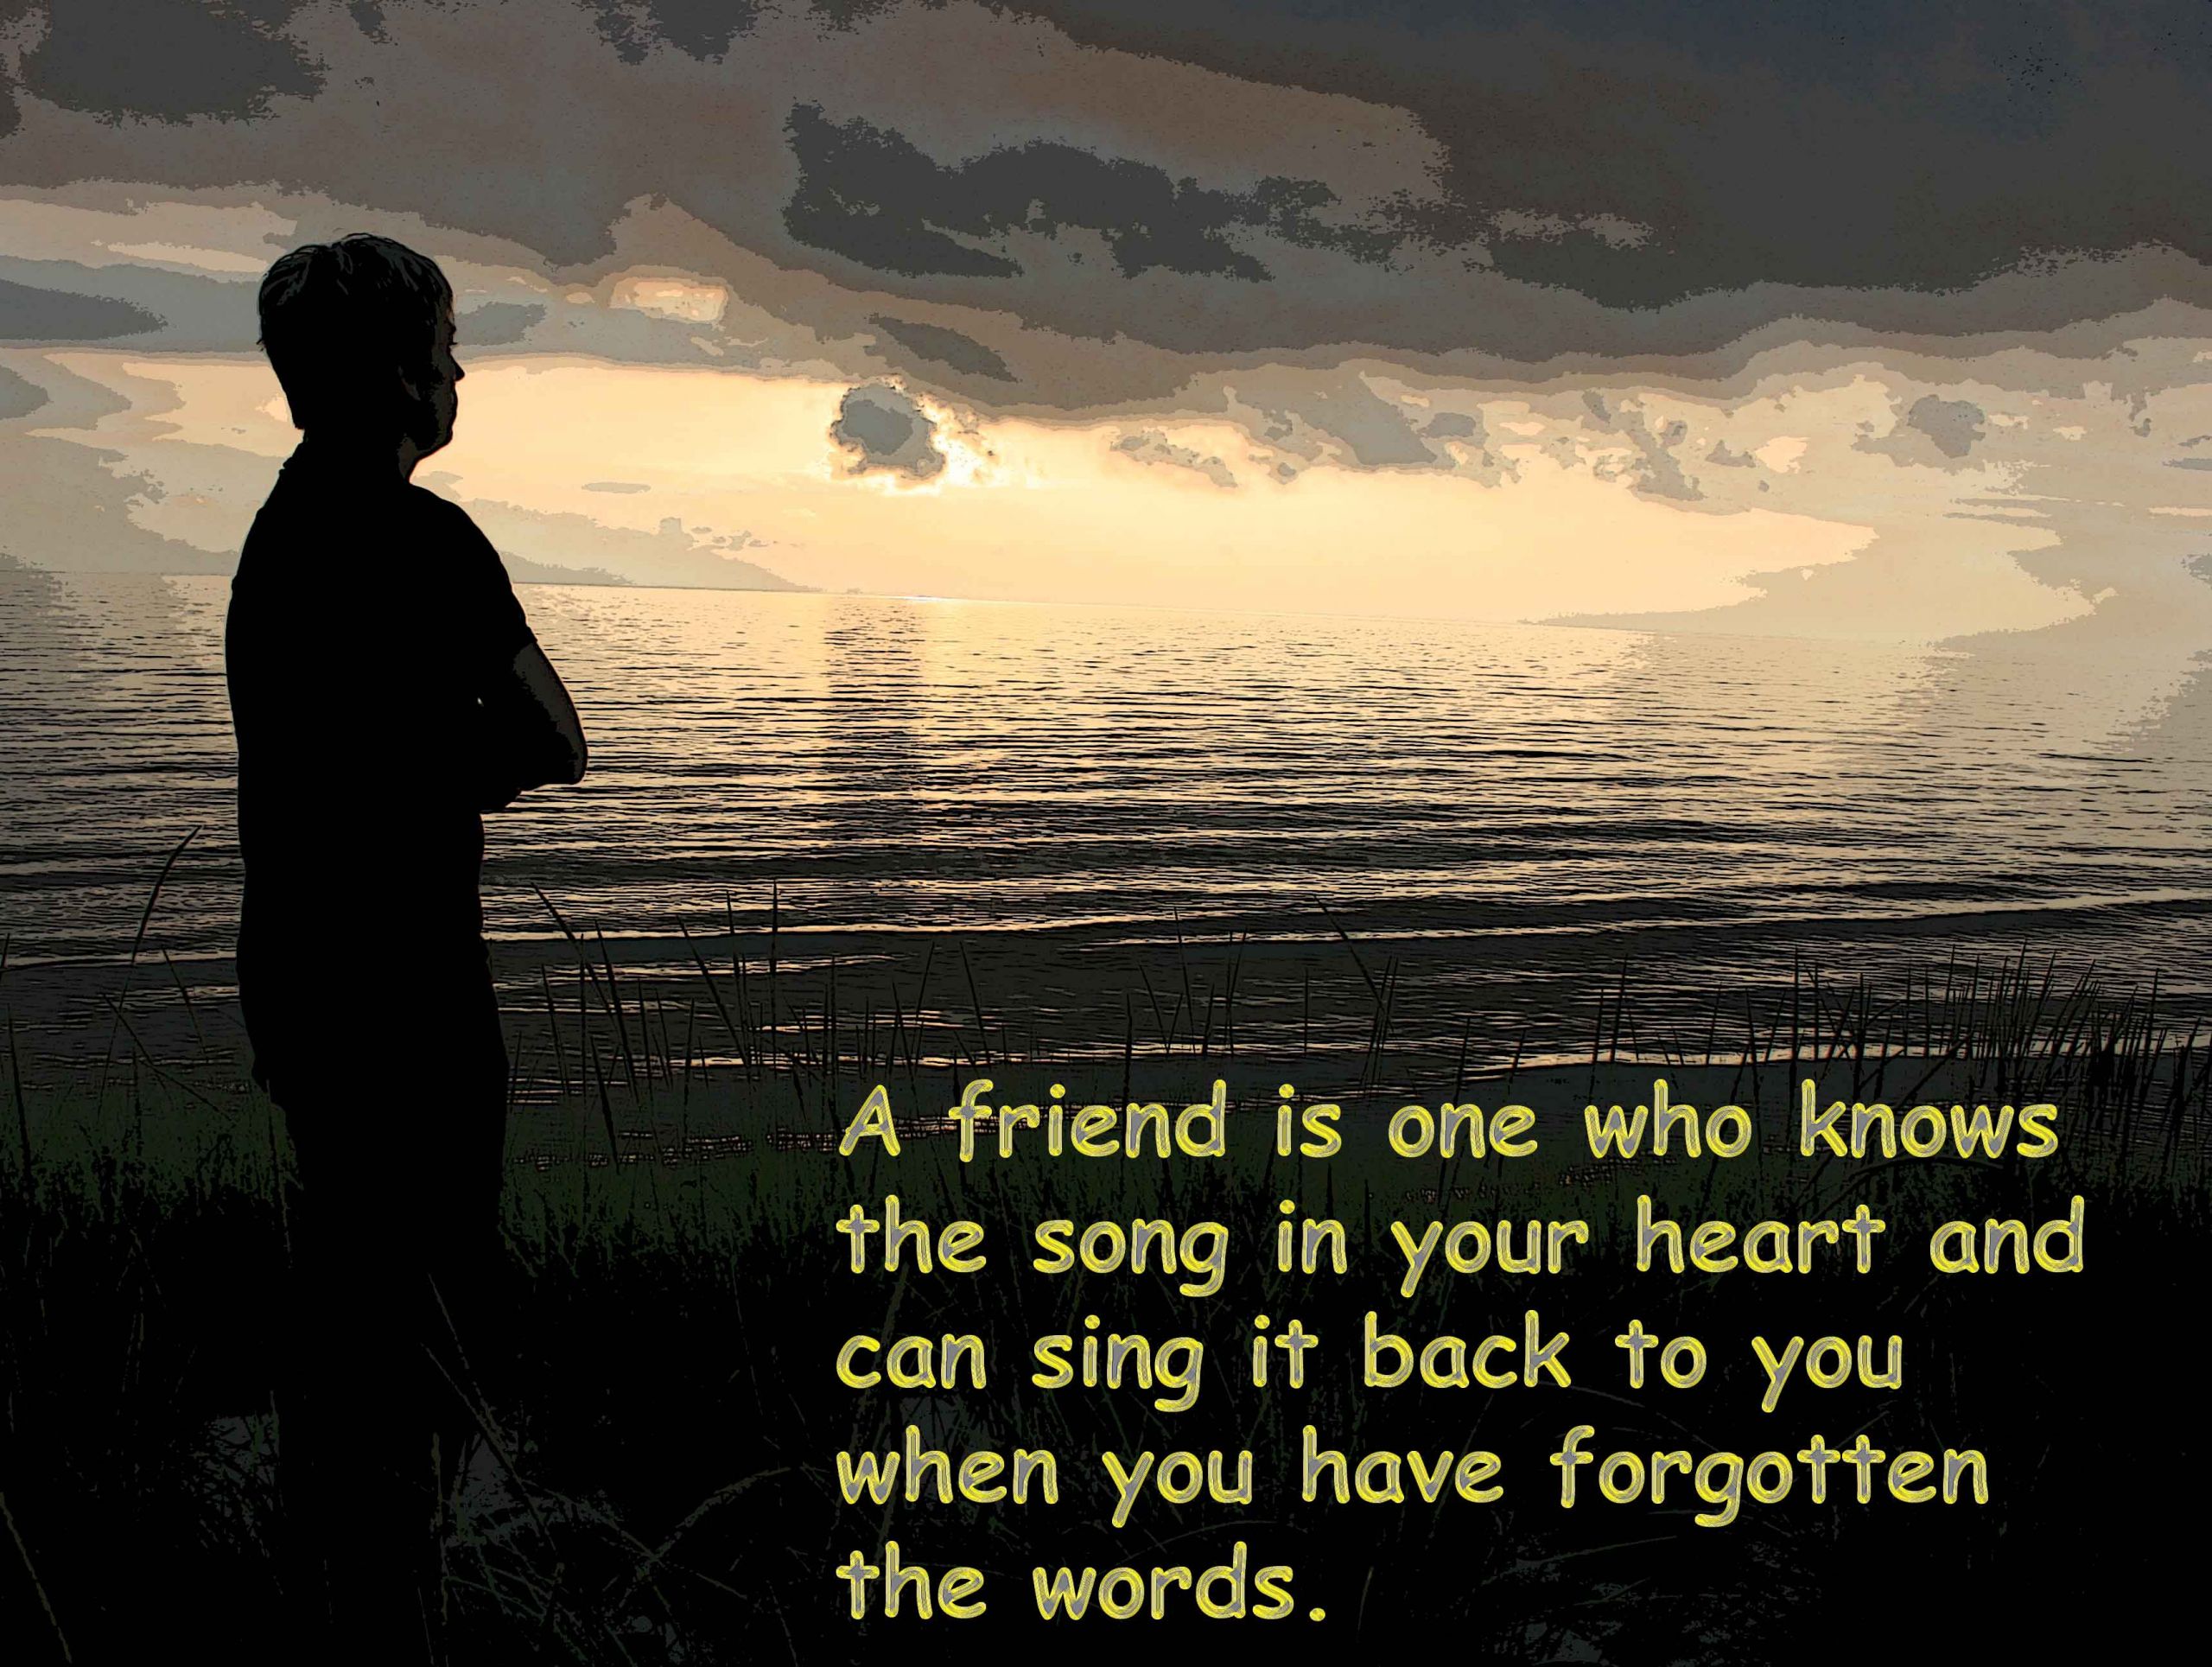 Inspirational Friendship Quotes
 23 Inspirational Friendship Quotes For Your Friend